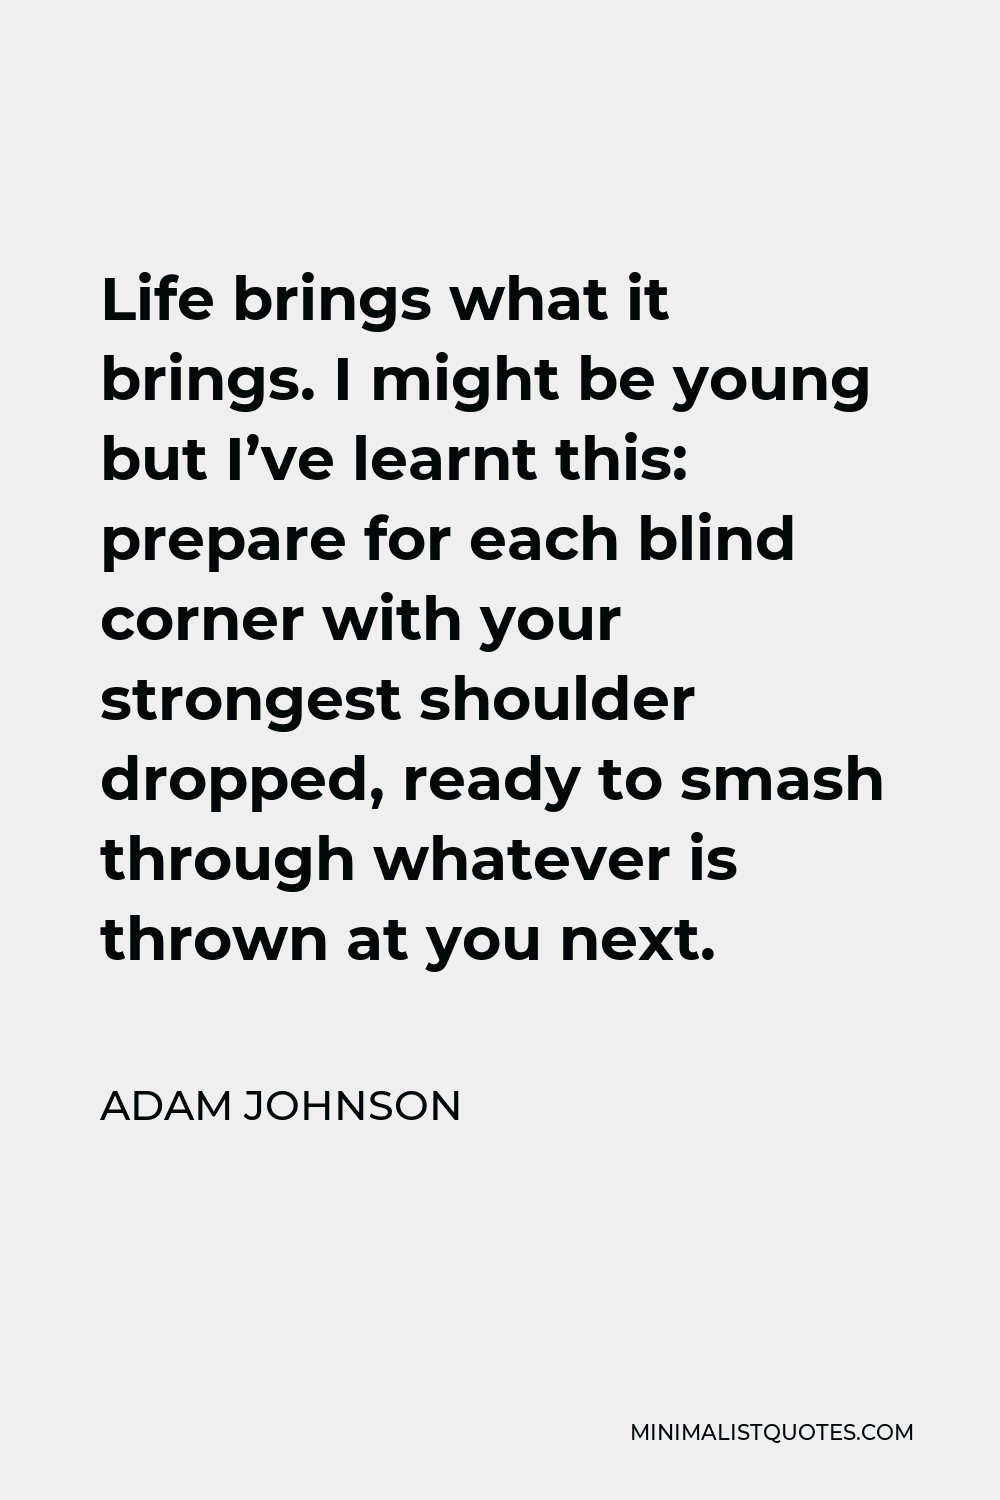 Adam Johnson Quote - Life brings what it brings. I might be young but I’ve learnt this: prepare for each blind corner with your strongest shoulder dropped, ready to smash through whatever is thrown at you next.